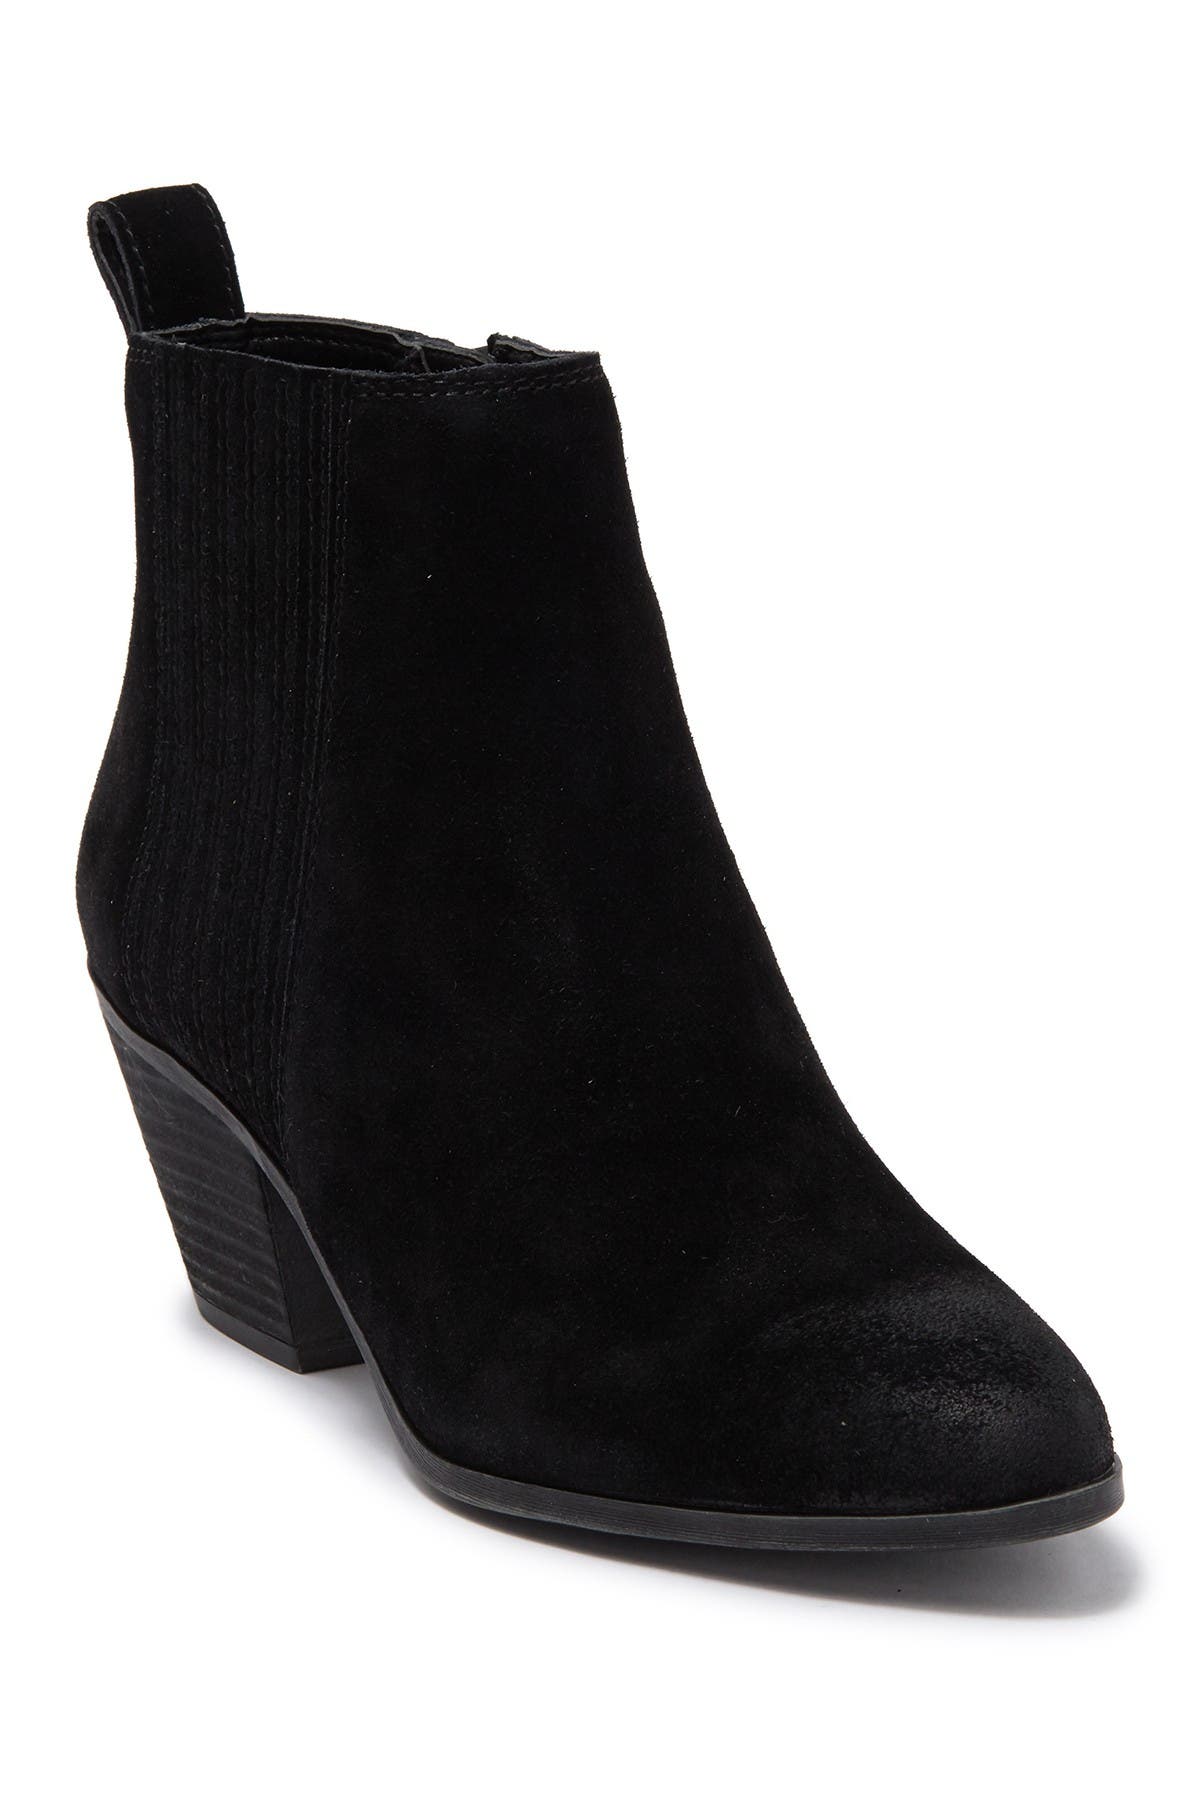 Black Suede Chelsea Boots Women : Black Suede Chelsea Boots With A ...